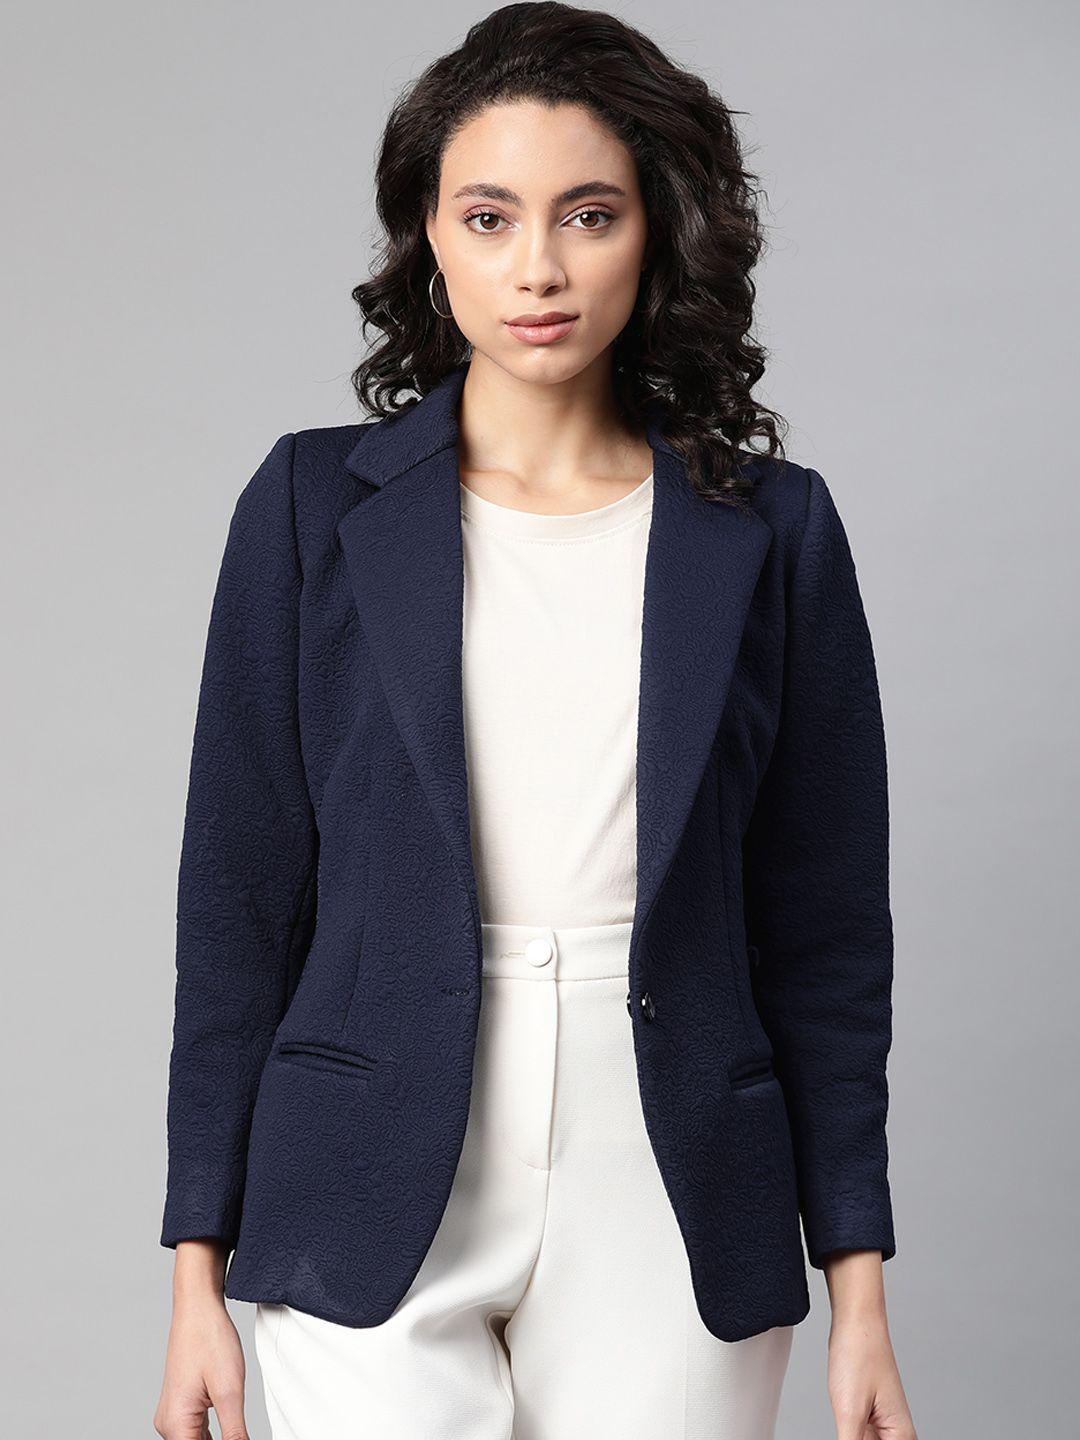 shaftesbury london women navy blue textured single-breasted knitted casual blazer